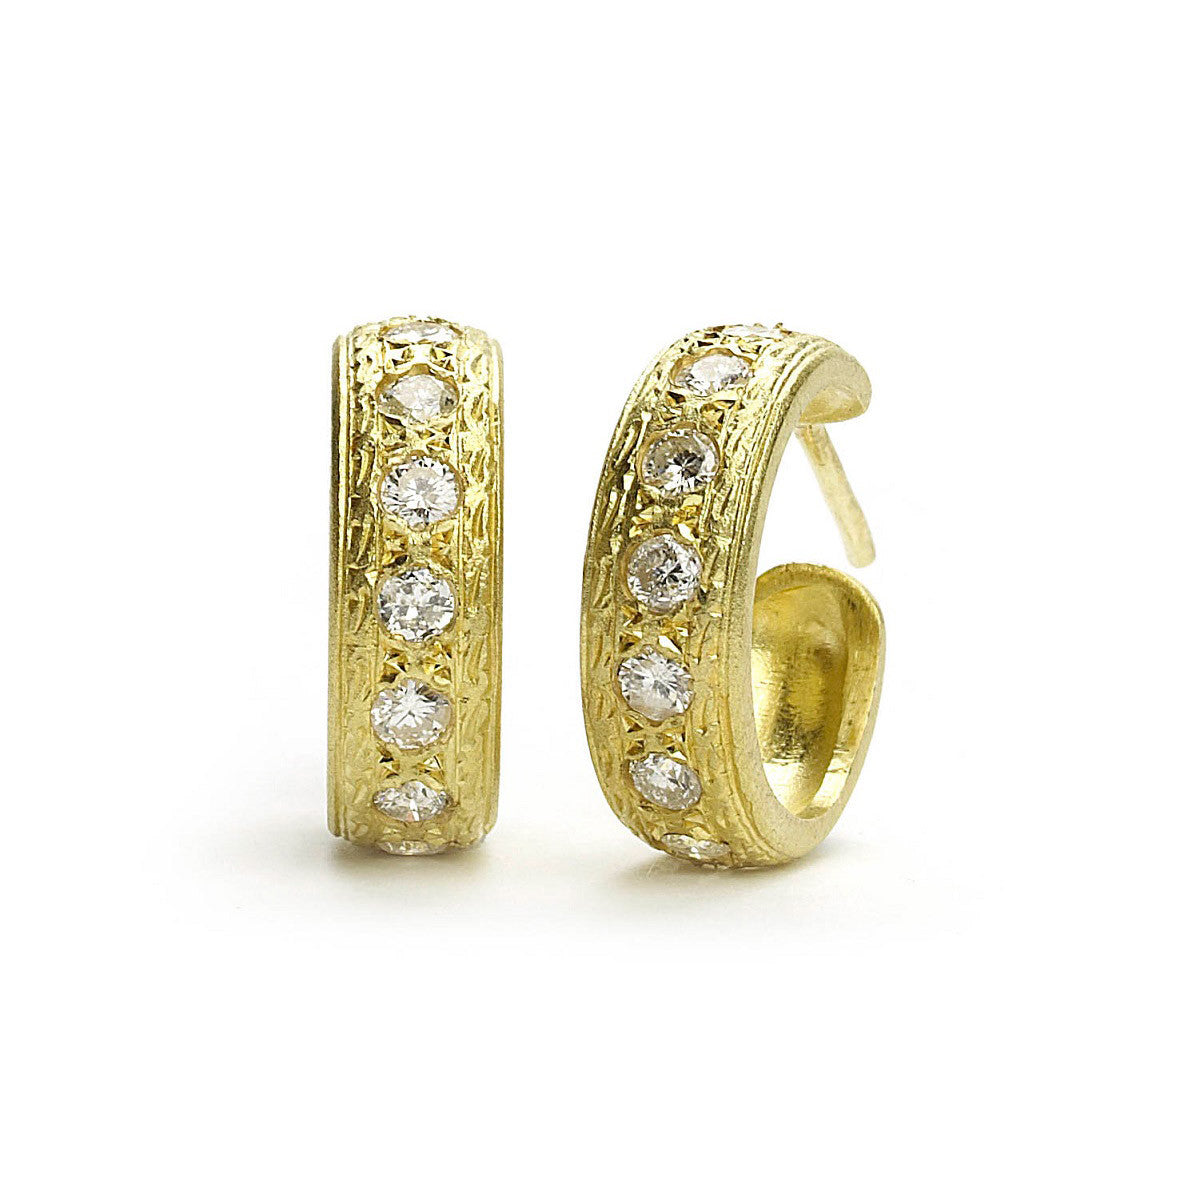 Yellow gold hoop earrings set with round cut diamonds with engraved border details